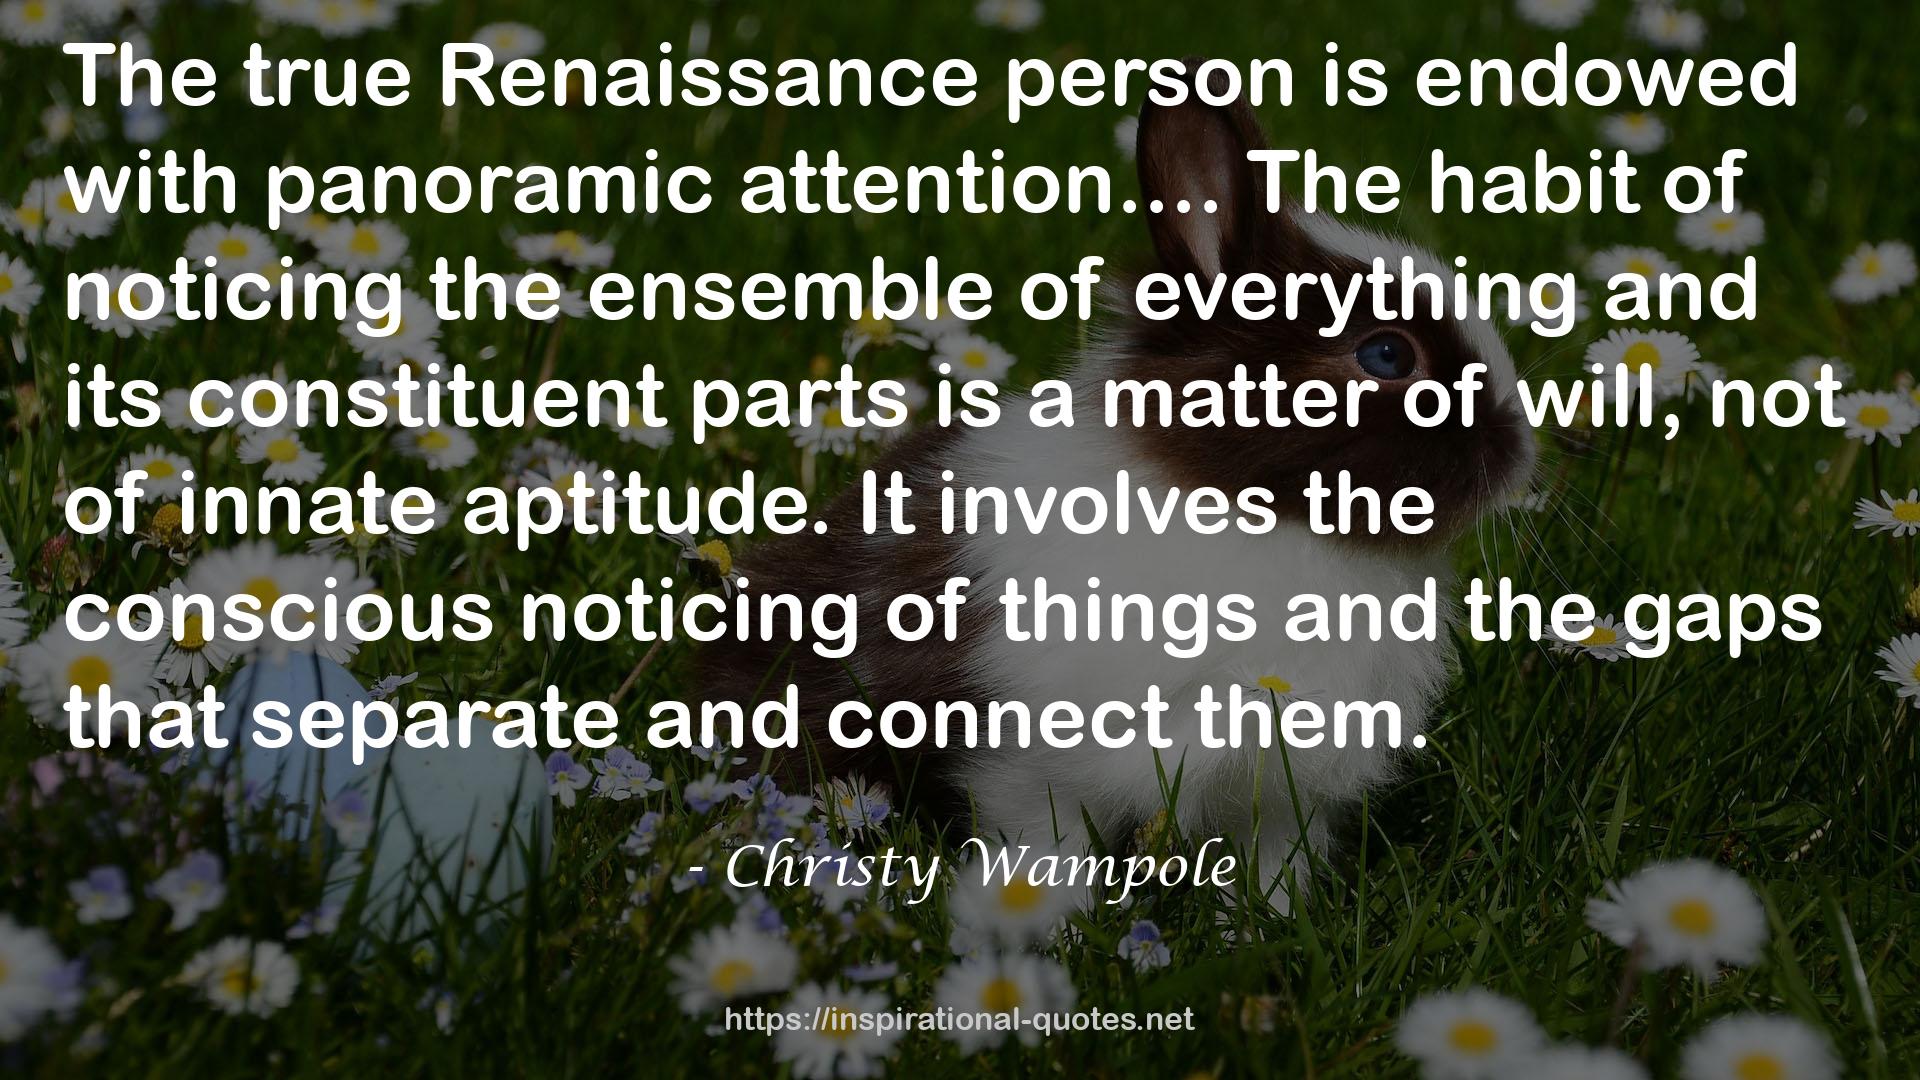 Christy Wampole QUOTES